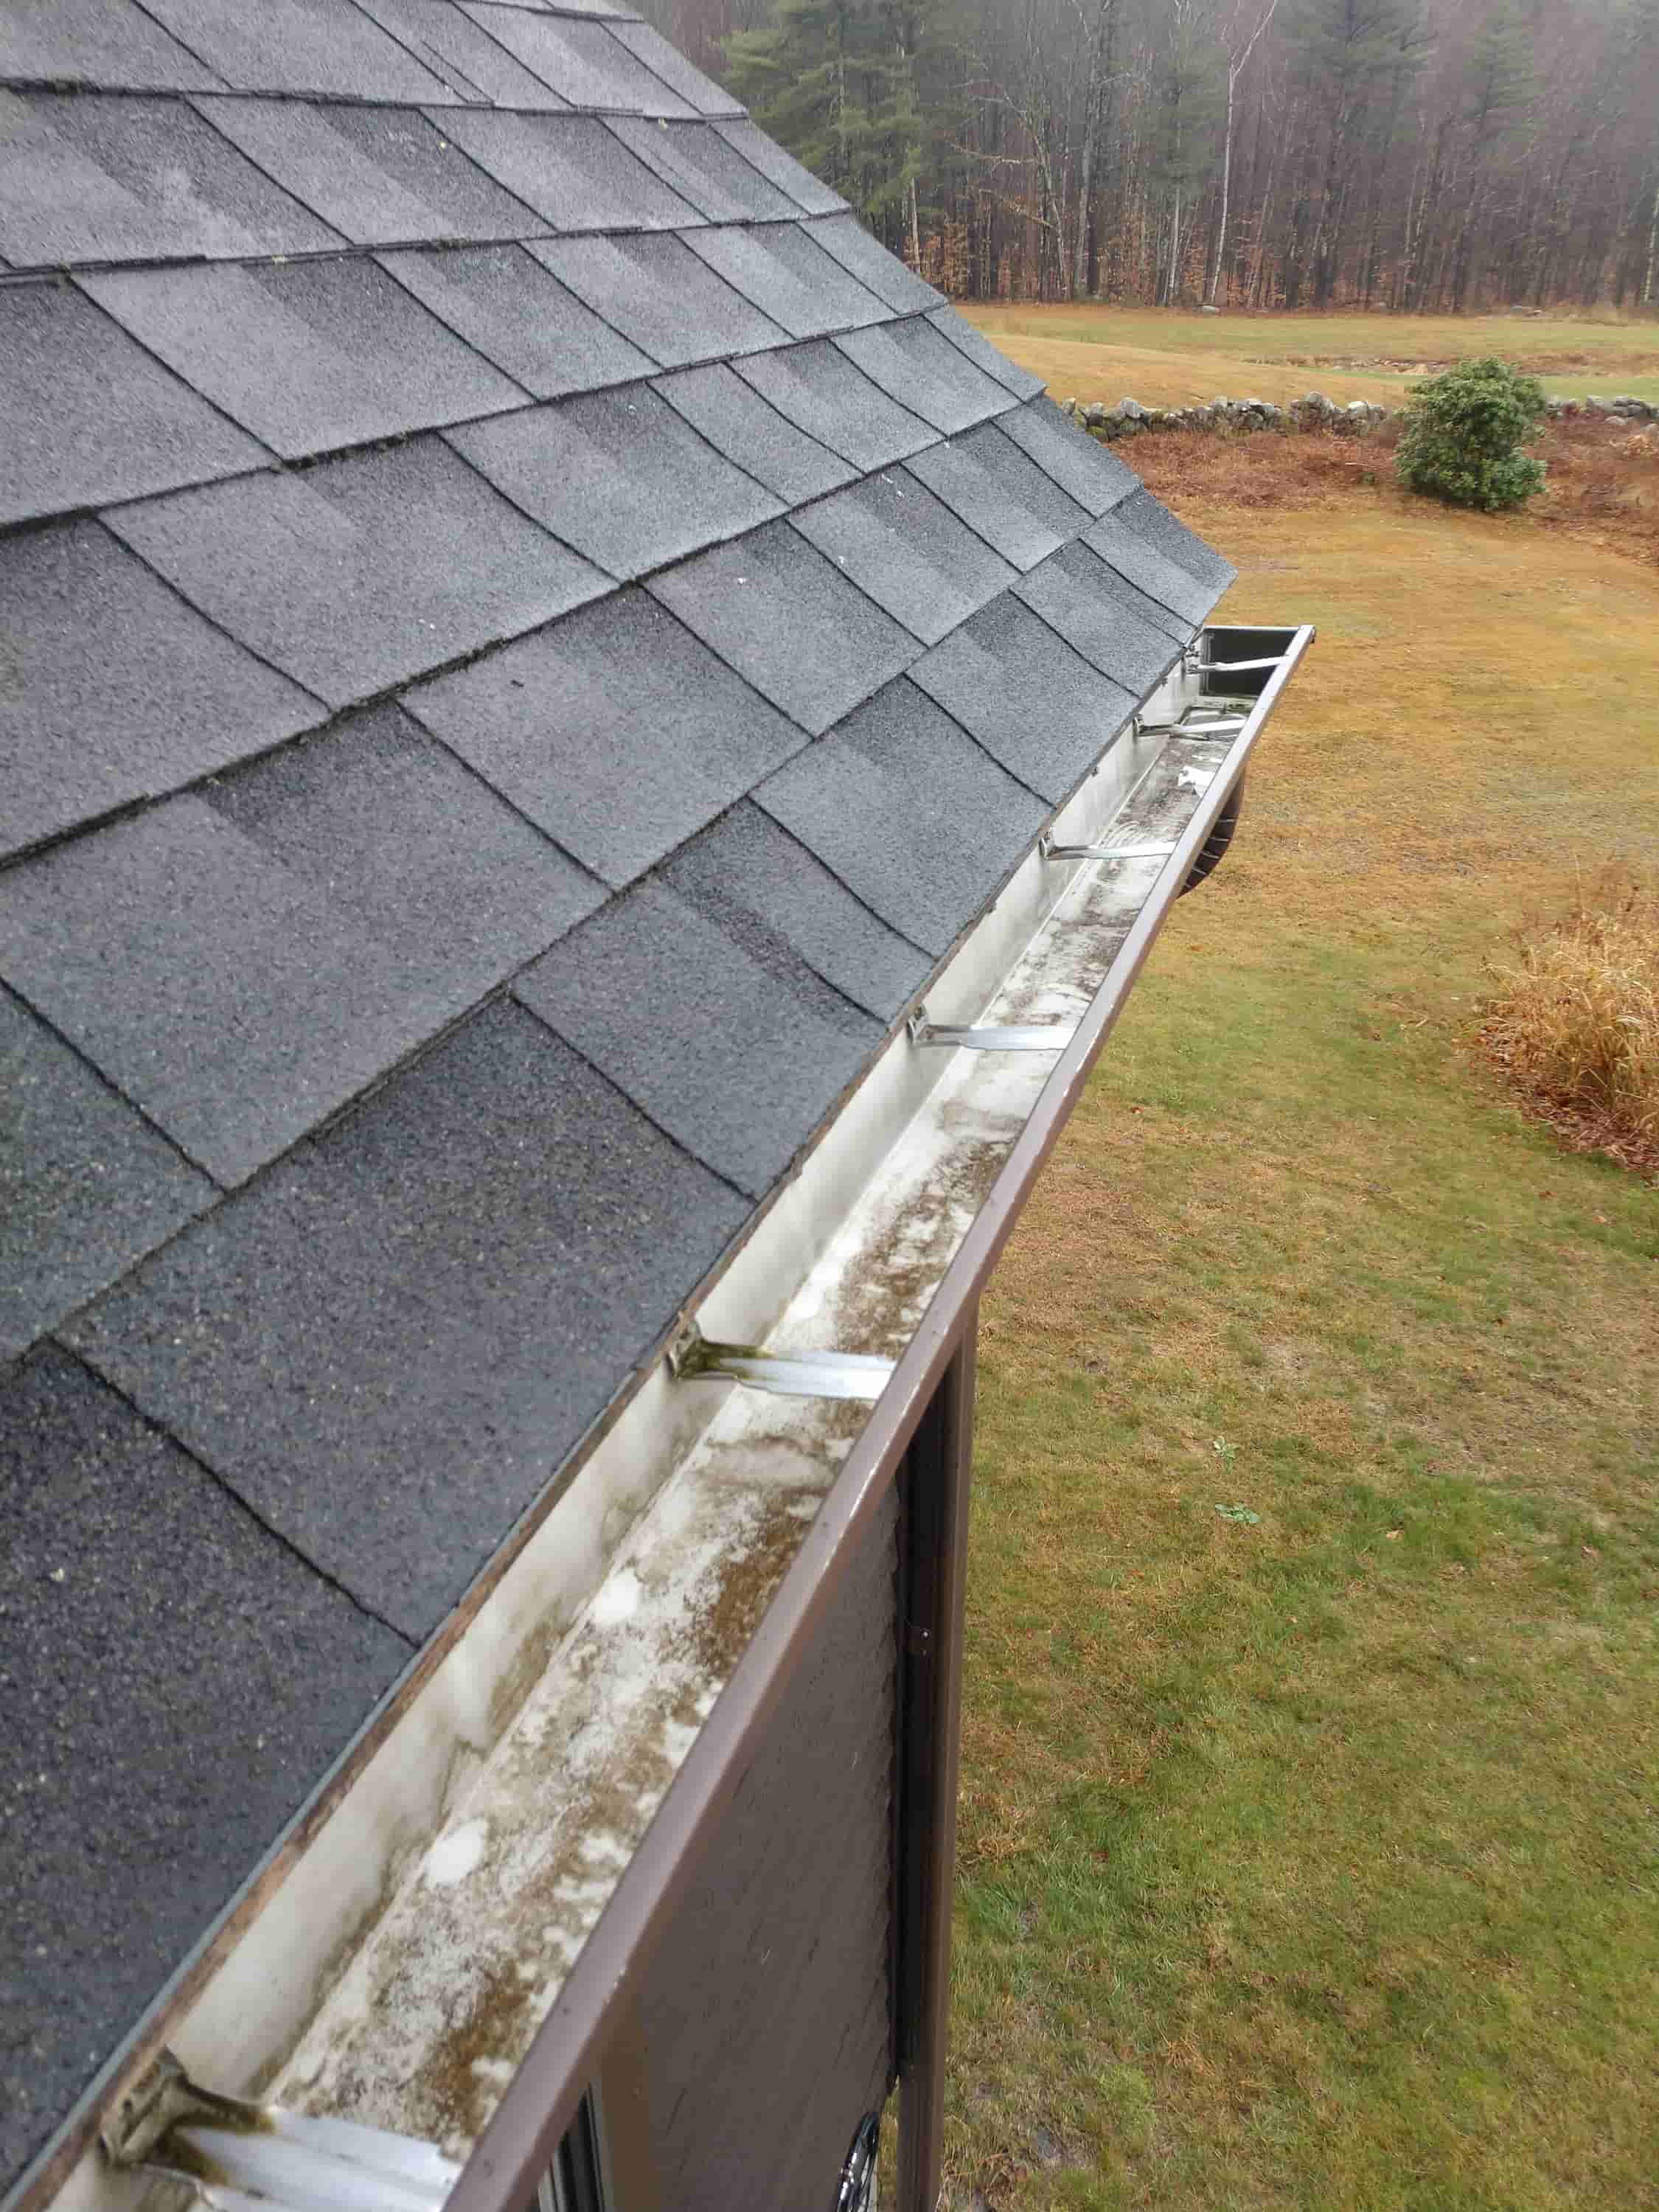 gutter cleaning in stoke on trent